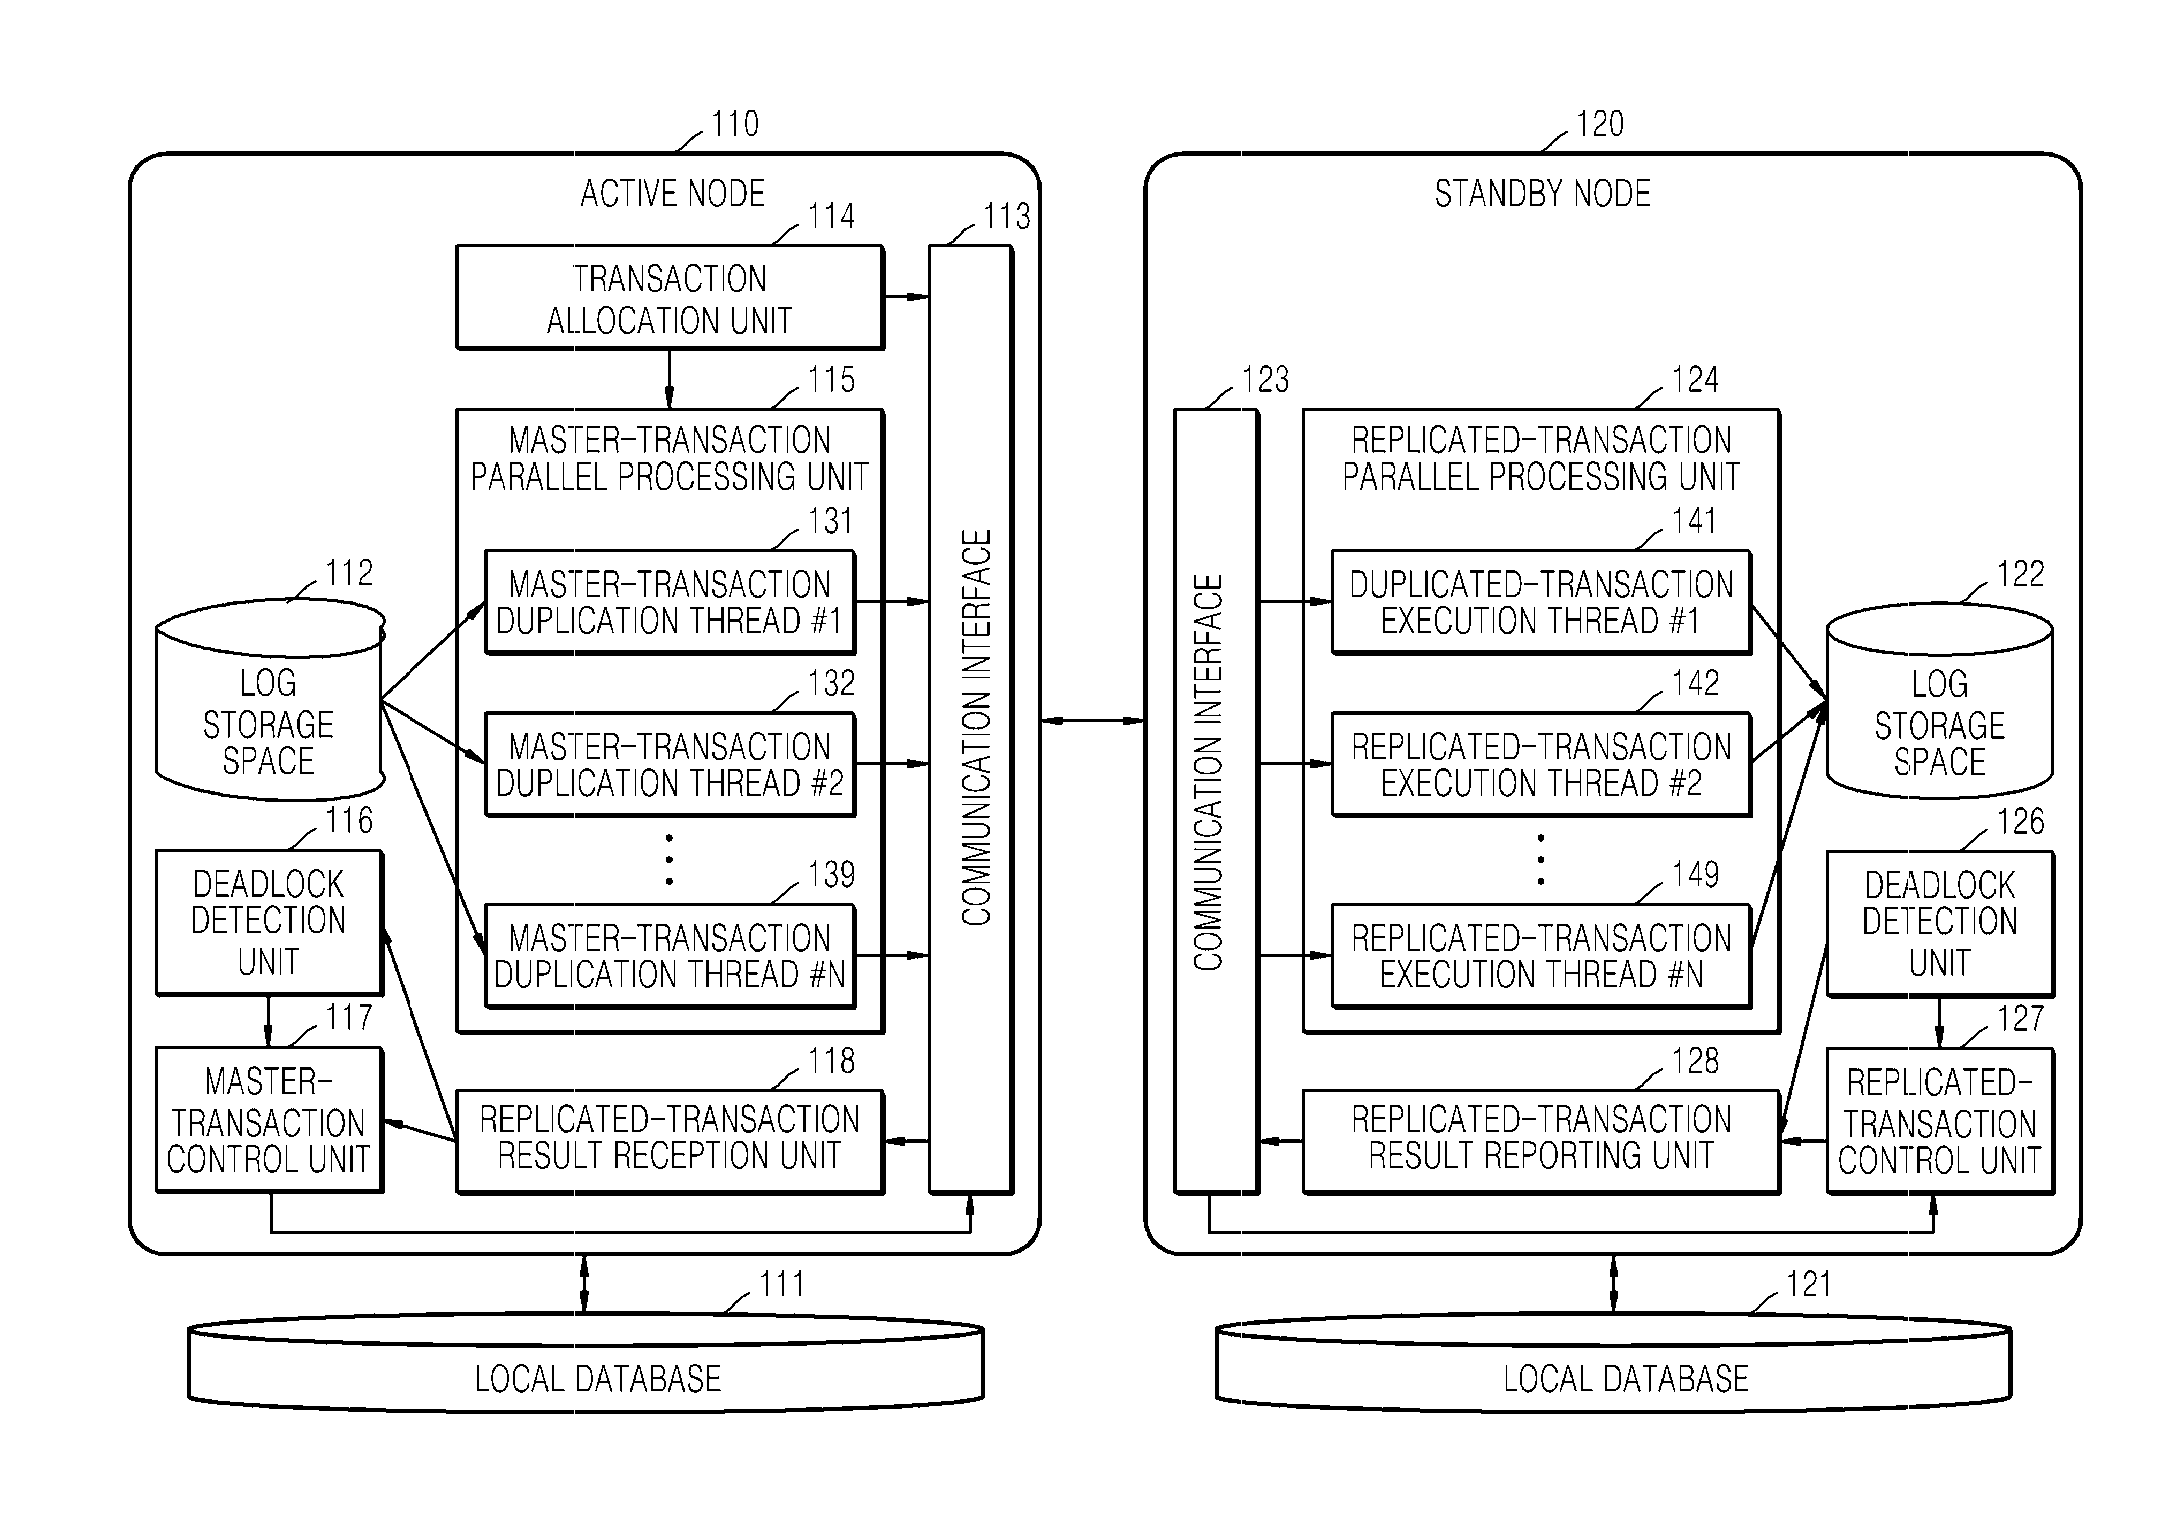 Parallel processing apparatus and method in database management system for synchronous replication